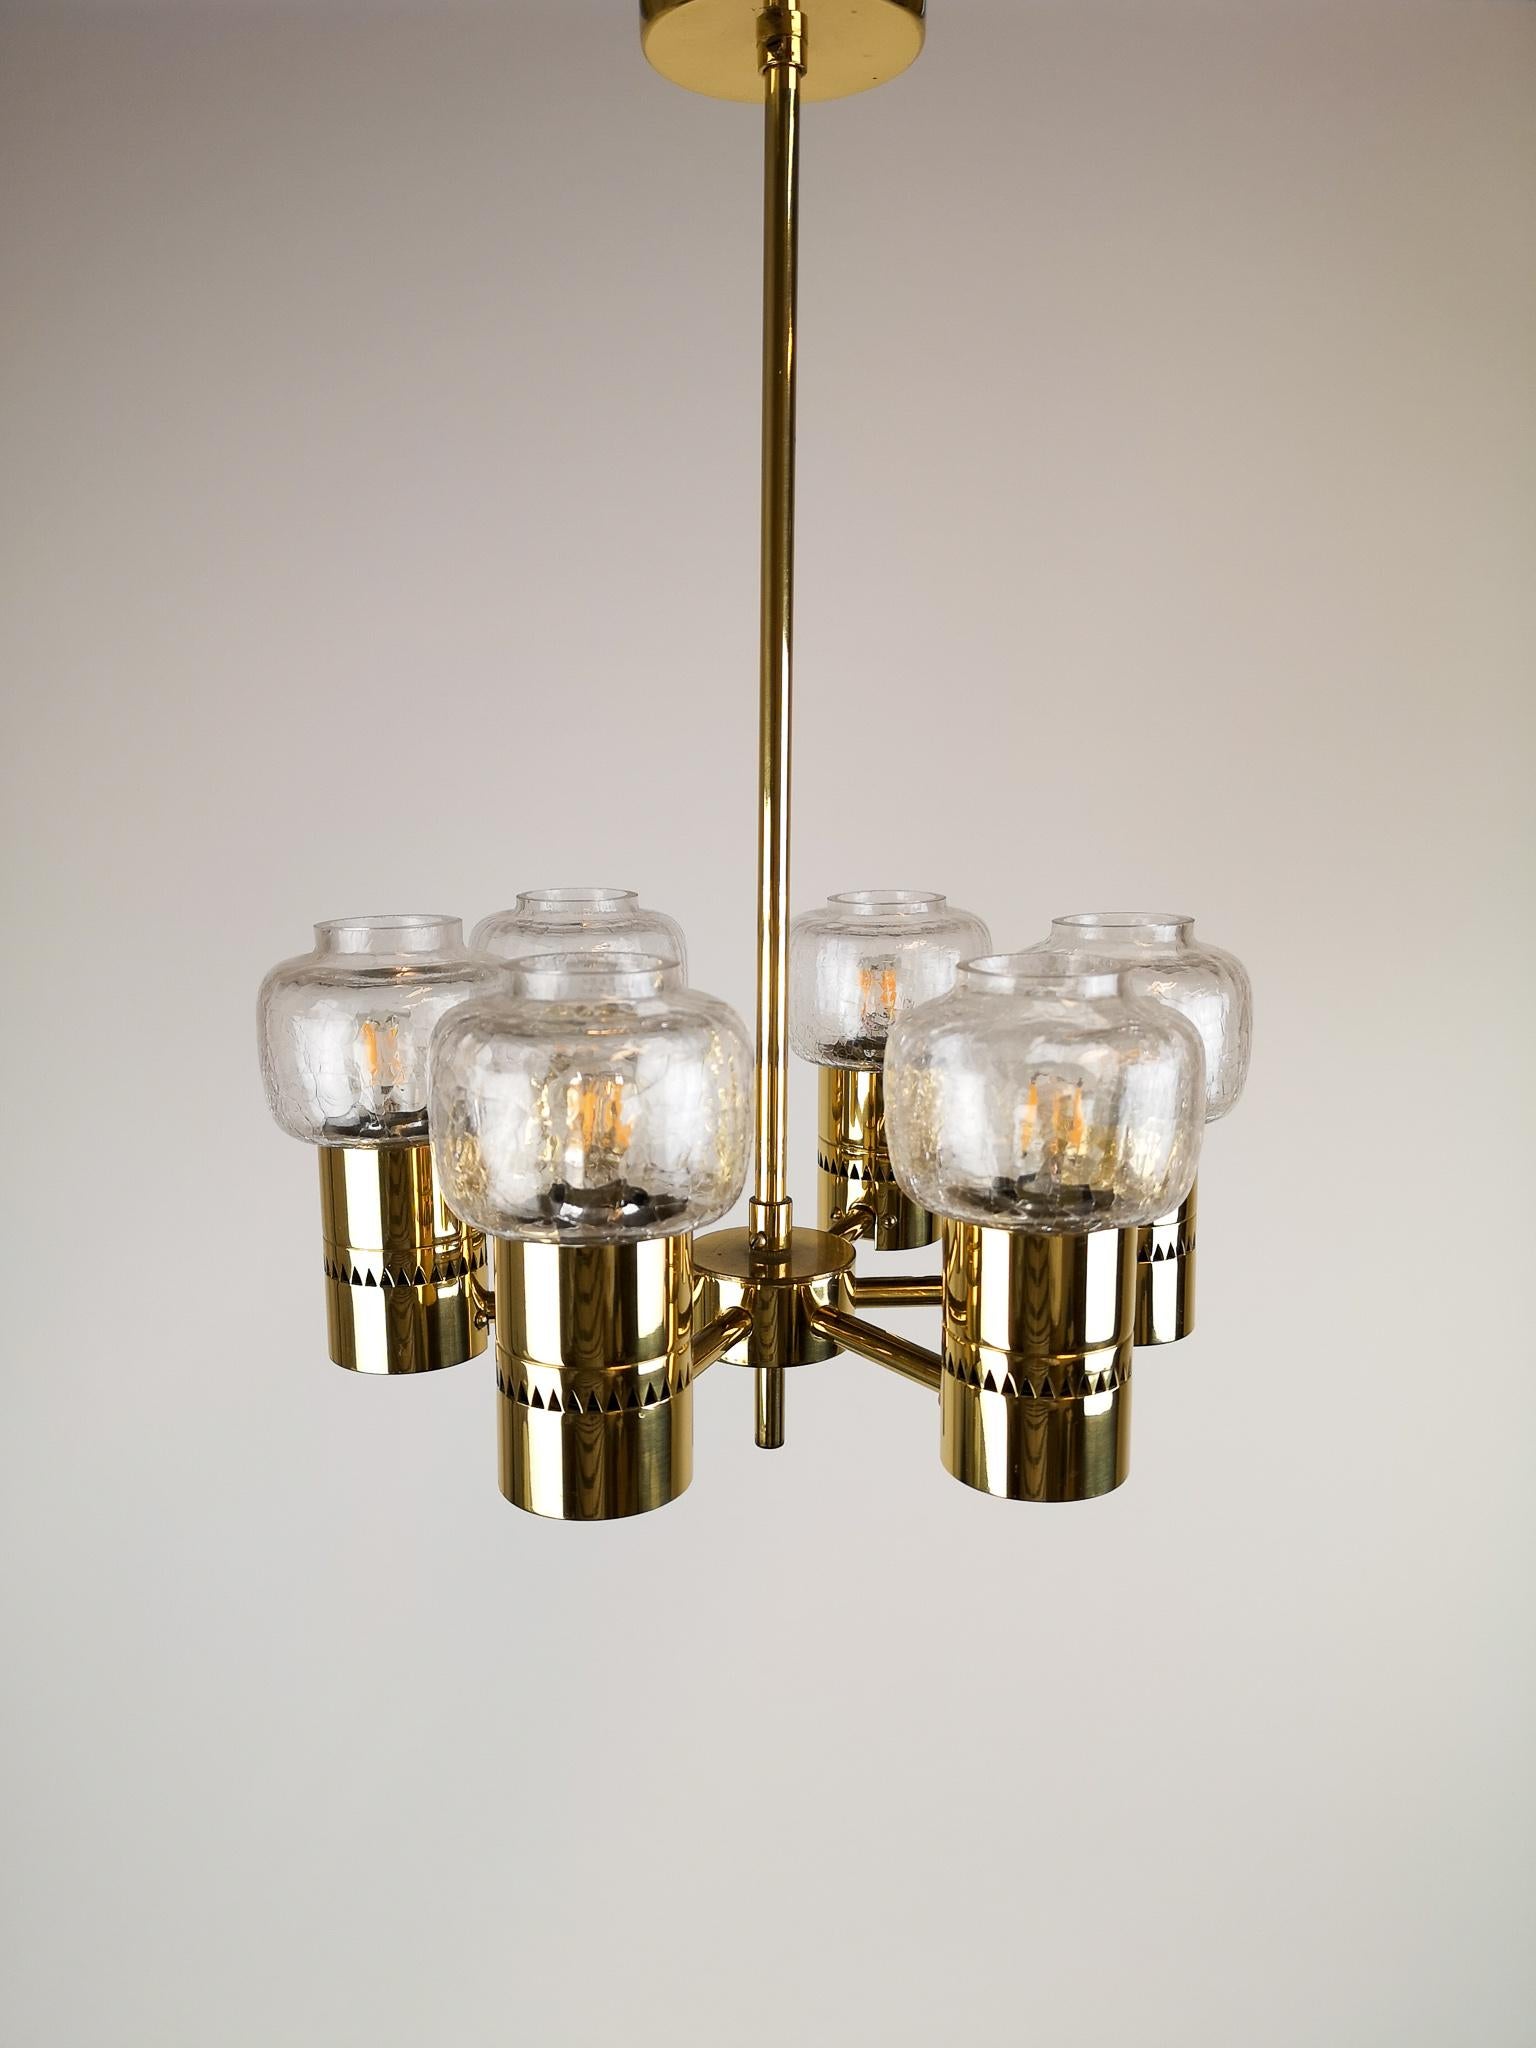 This ceiling lamp was designed by Hans-Agne Jakobsson and produced by Hans-Agne Jakobsson for the Swedish Company AB Markaryd.
The chandelier has 6 lights with glass. 

Good working condition, with some scratches.

Measures: D 32 cm, H 50